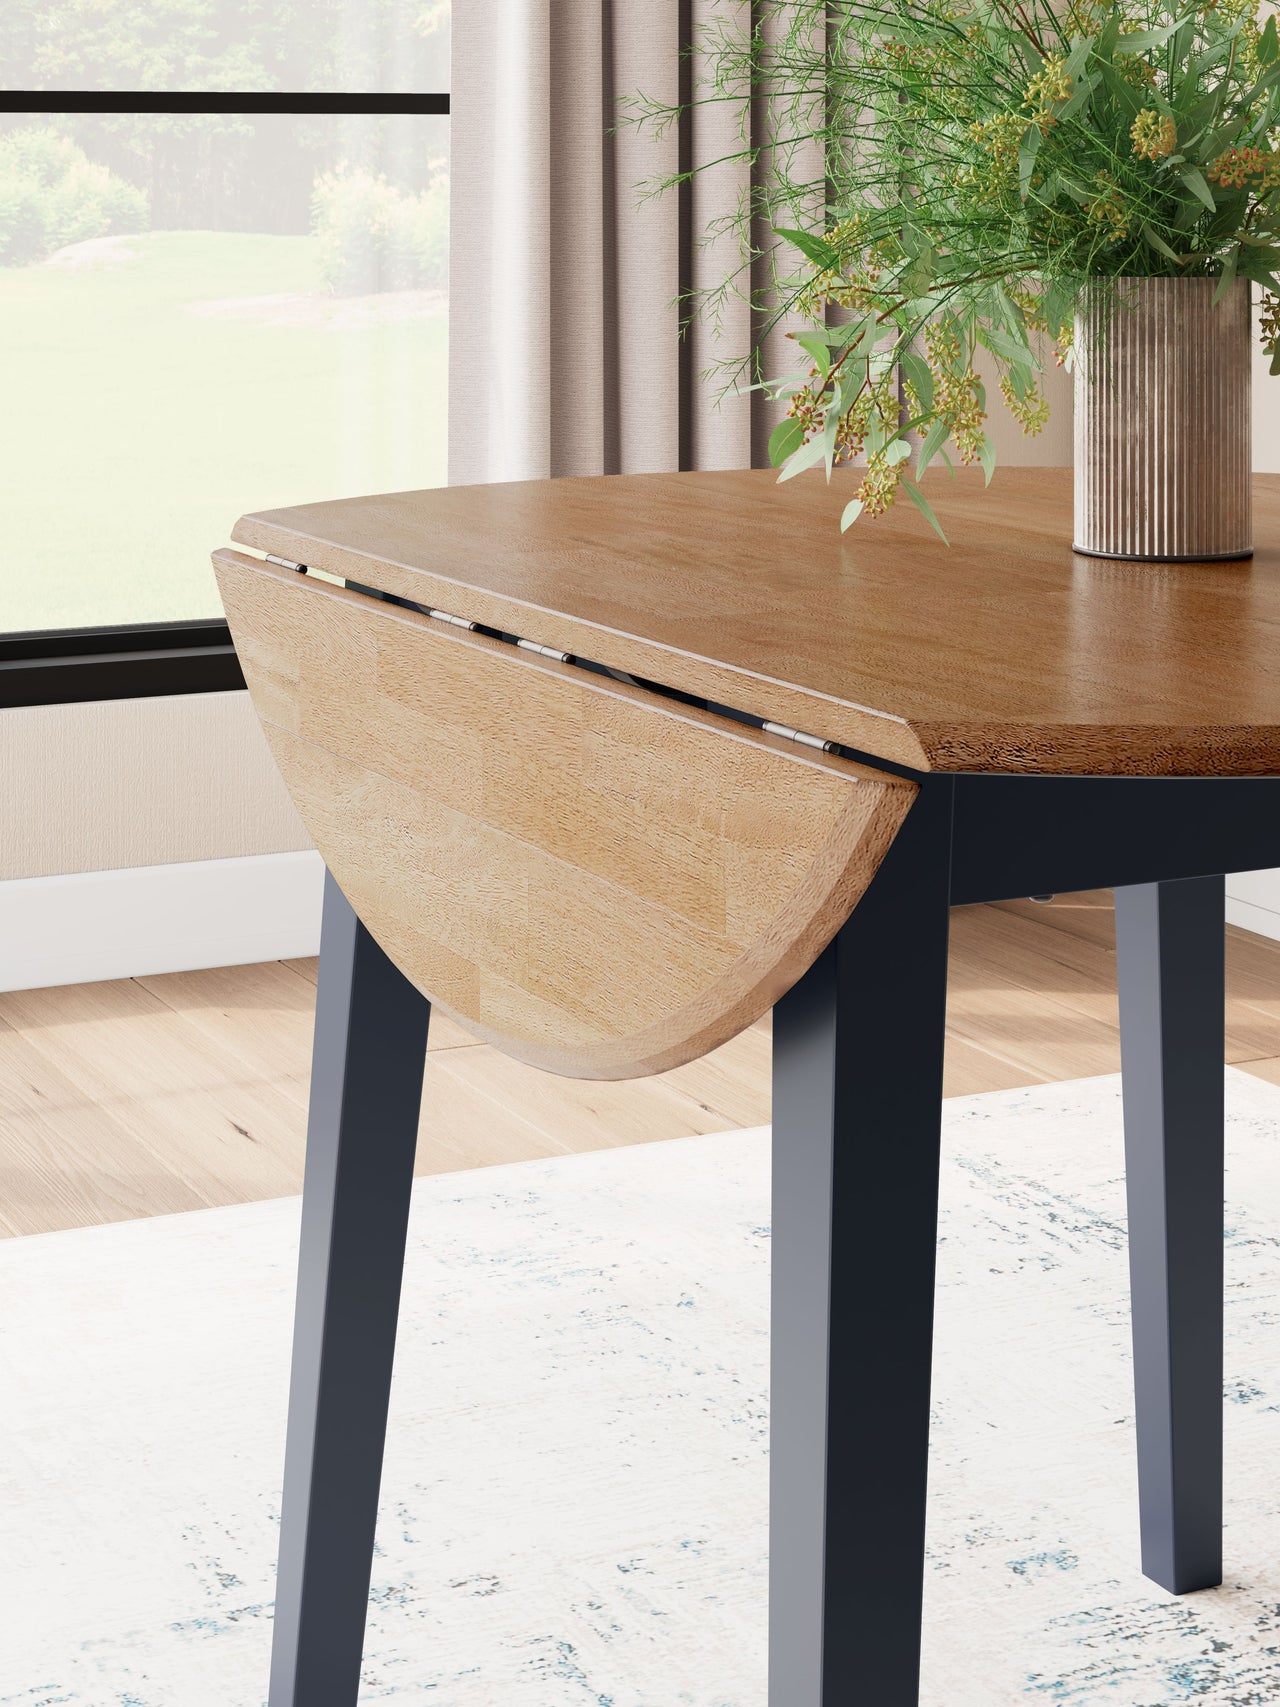 Gesthaven - Round Dining Room Drop Leaf Table - Tony's Home Furnishings